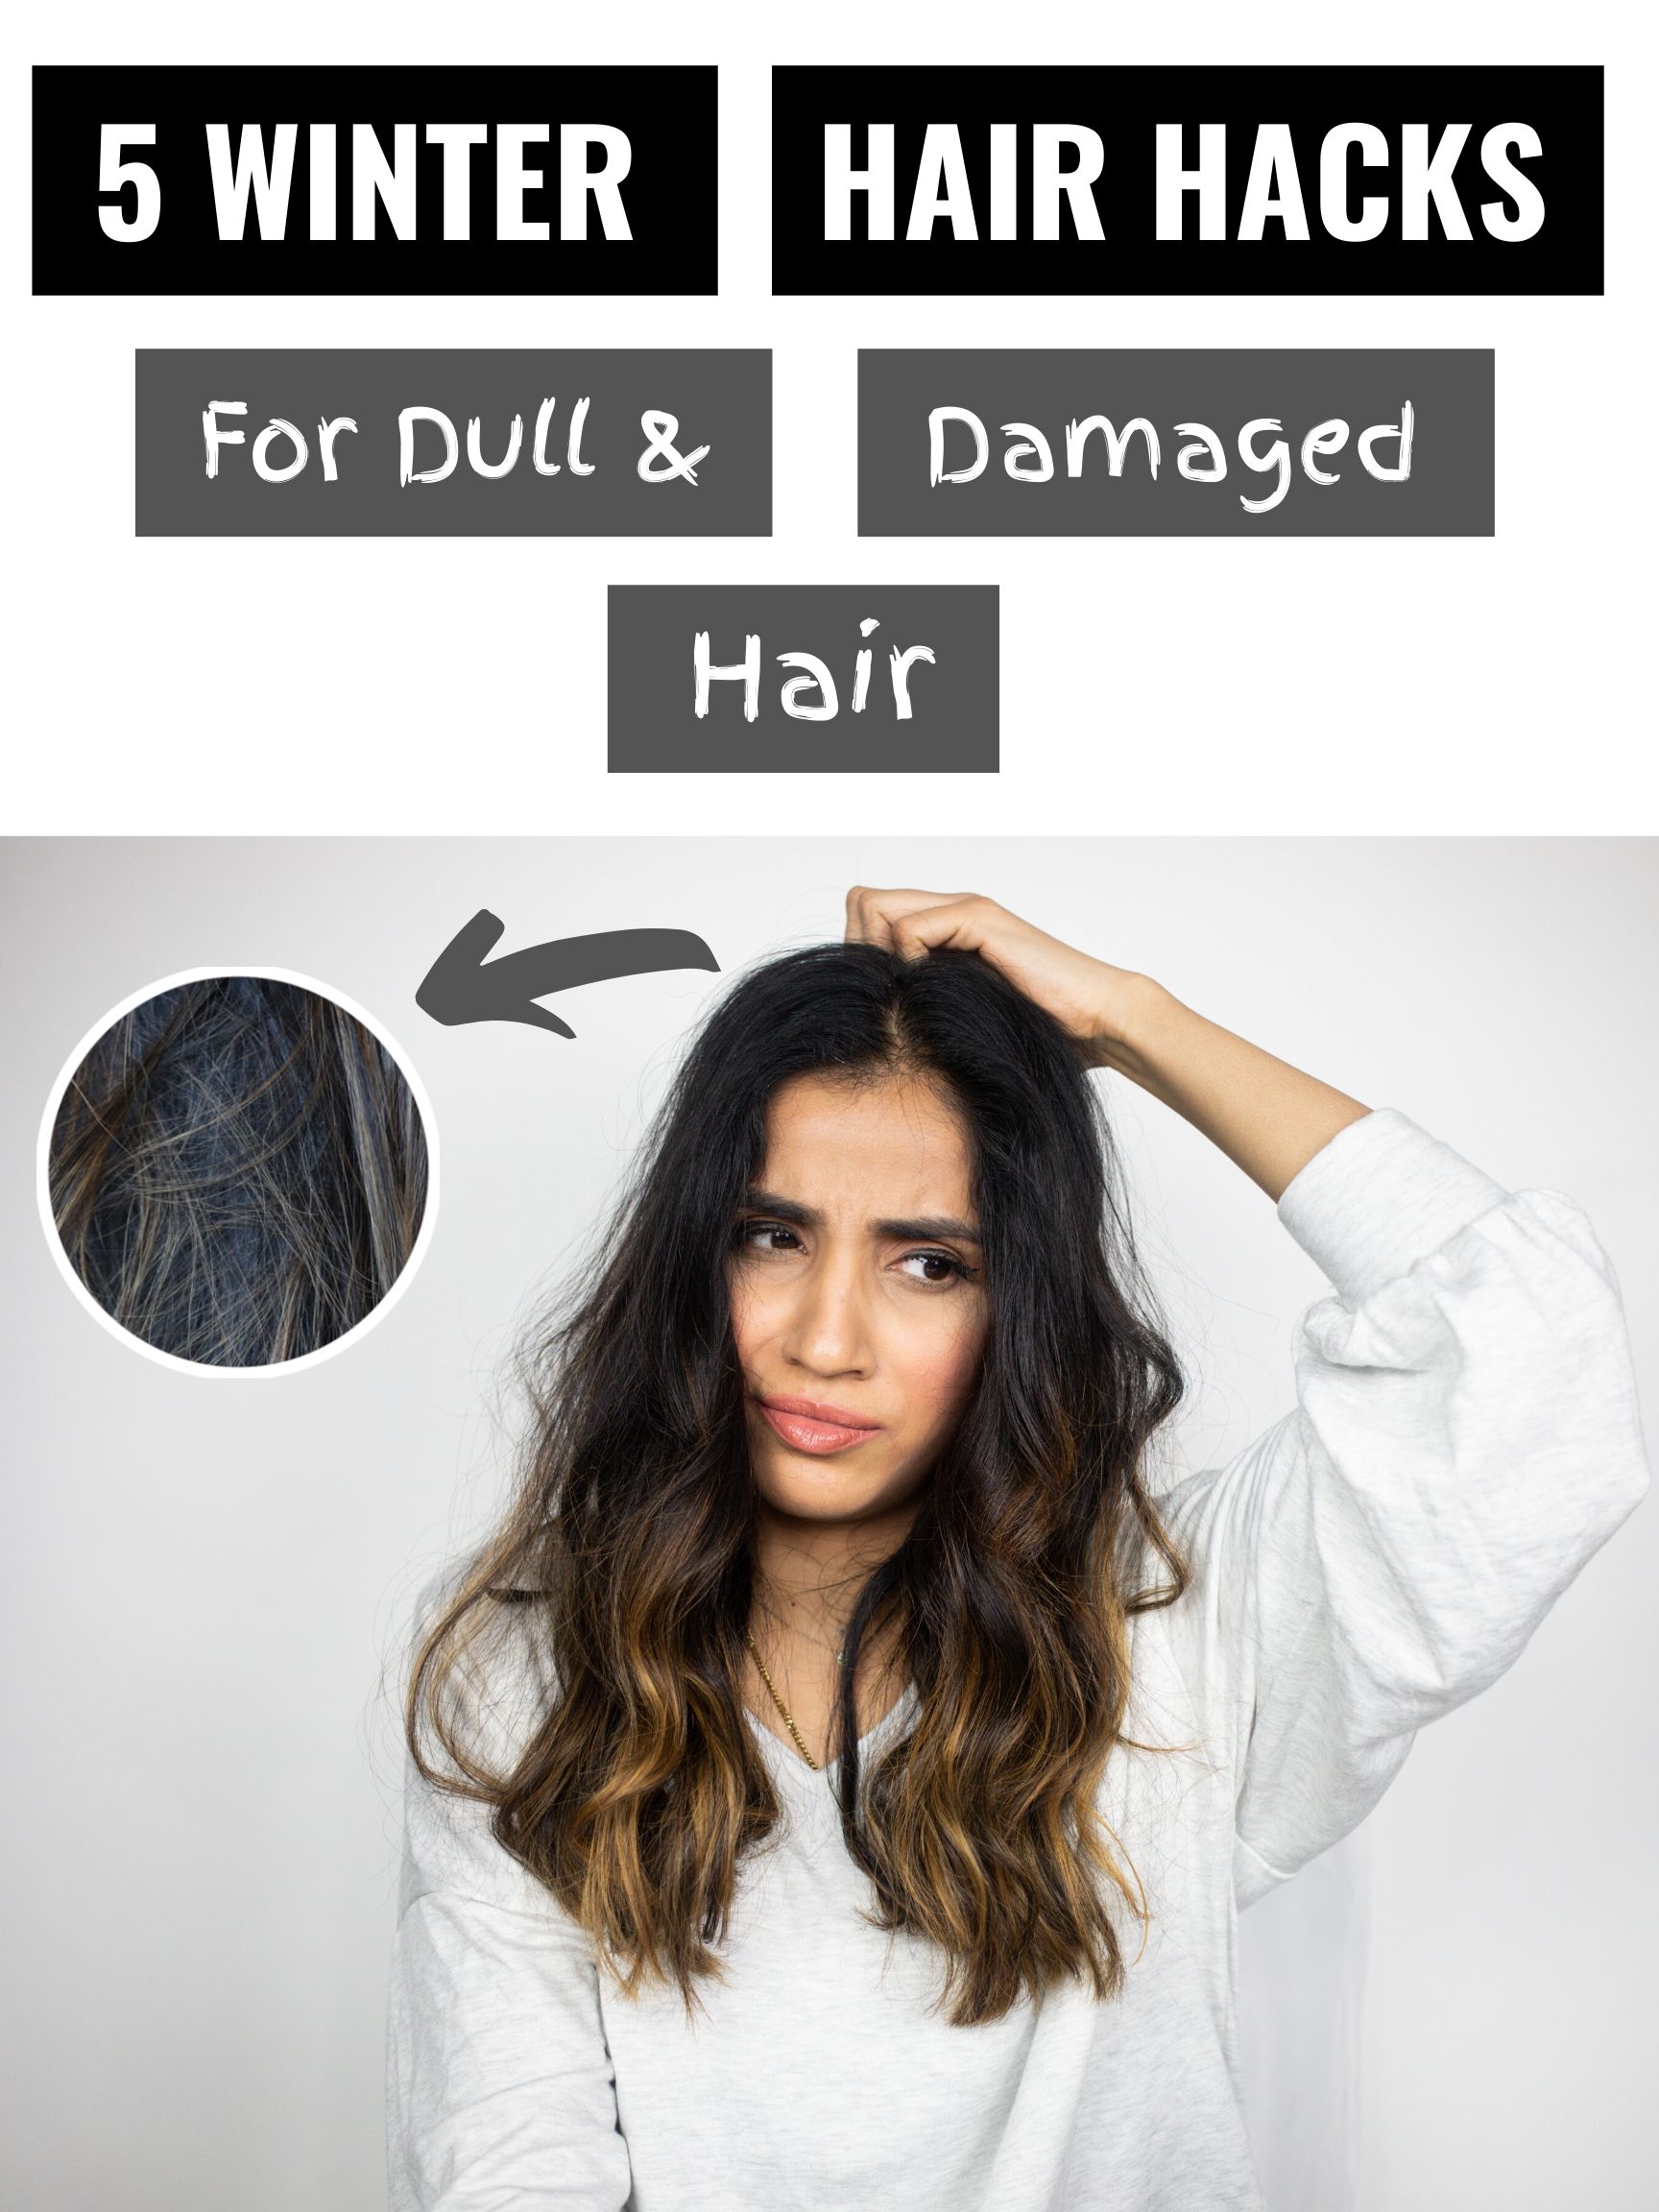 my 5 HAIR HACKS for dull and damaged hair turorial 2020 2019 22